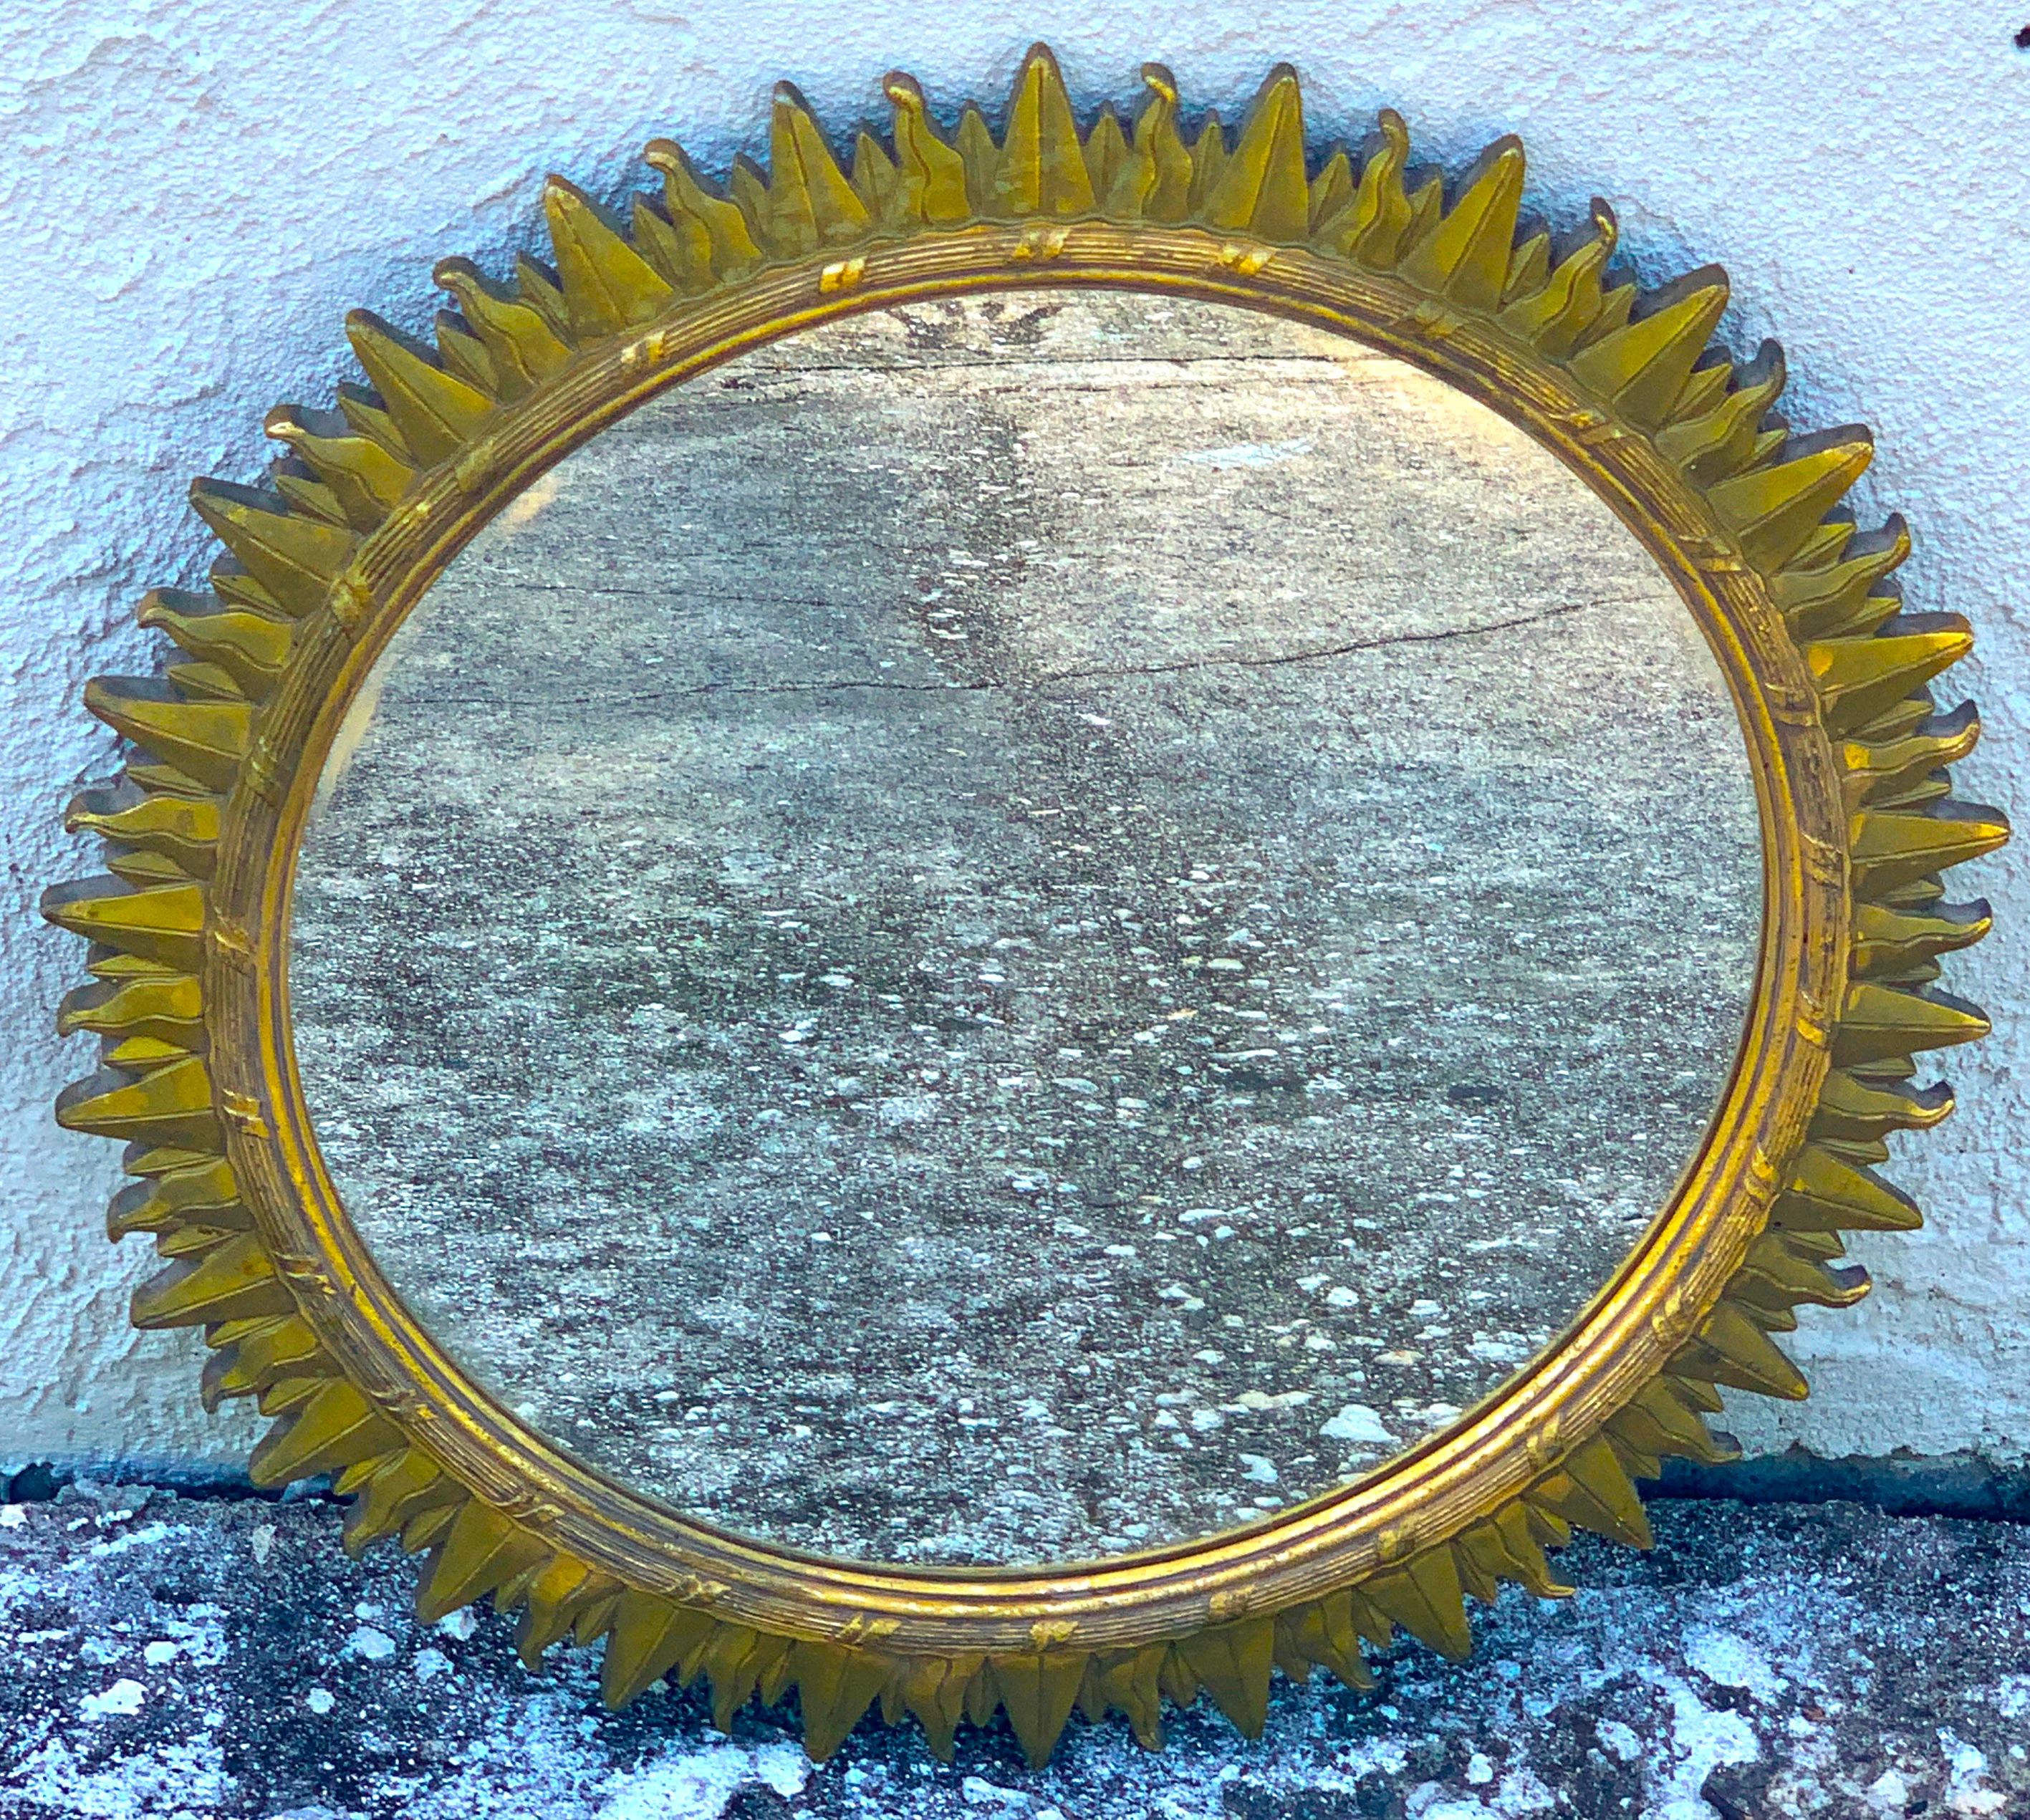 French modern giltwood sunburst mirror

Revel in the luxurious allure of our French Modern Giltwood Sunburst Mirror. This piece, hailing from 1940s France, displays a body of gesso and giltwood grace, exquisitely crafted into a captivating sunburst